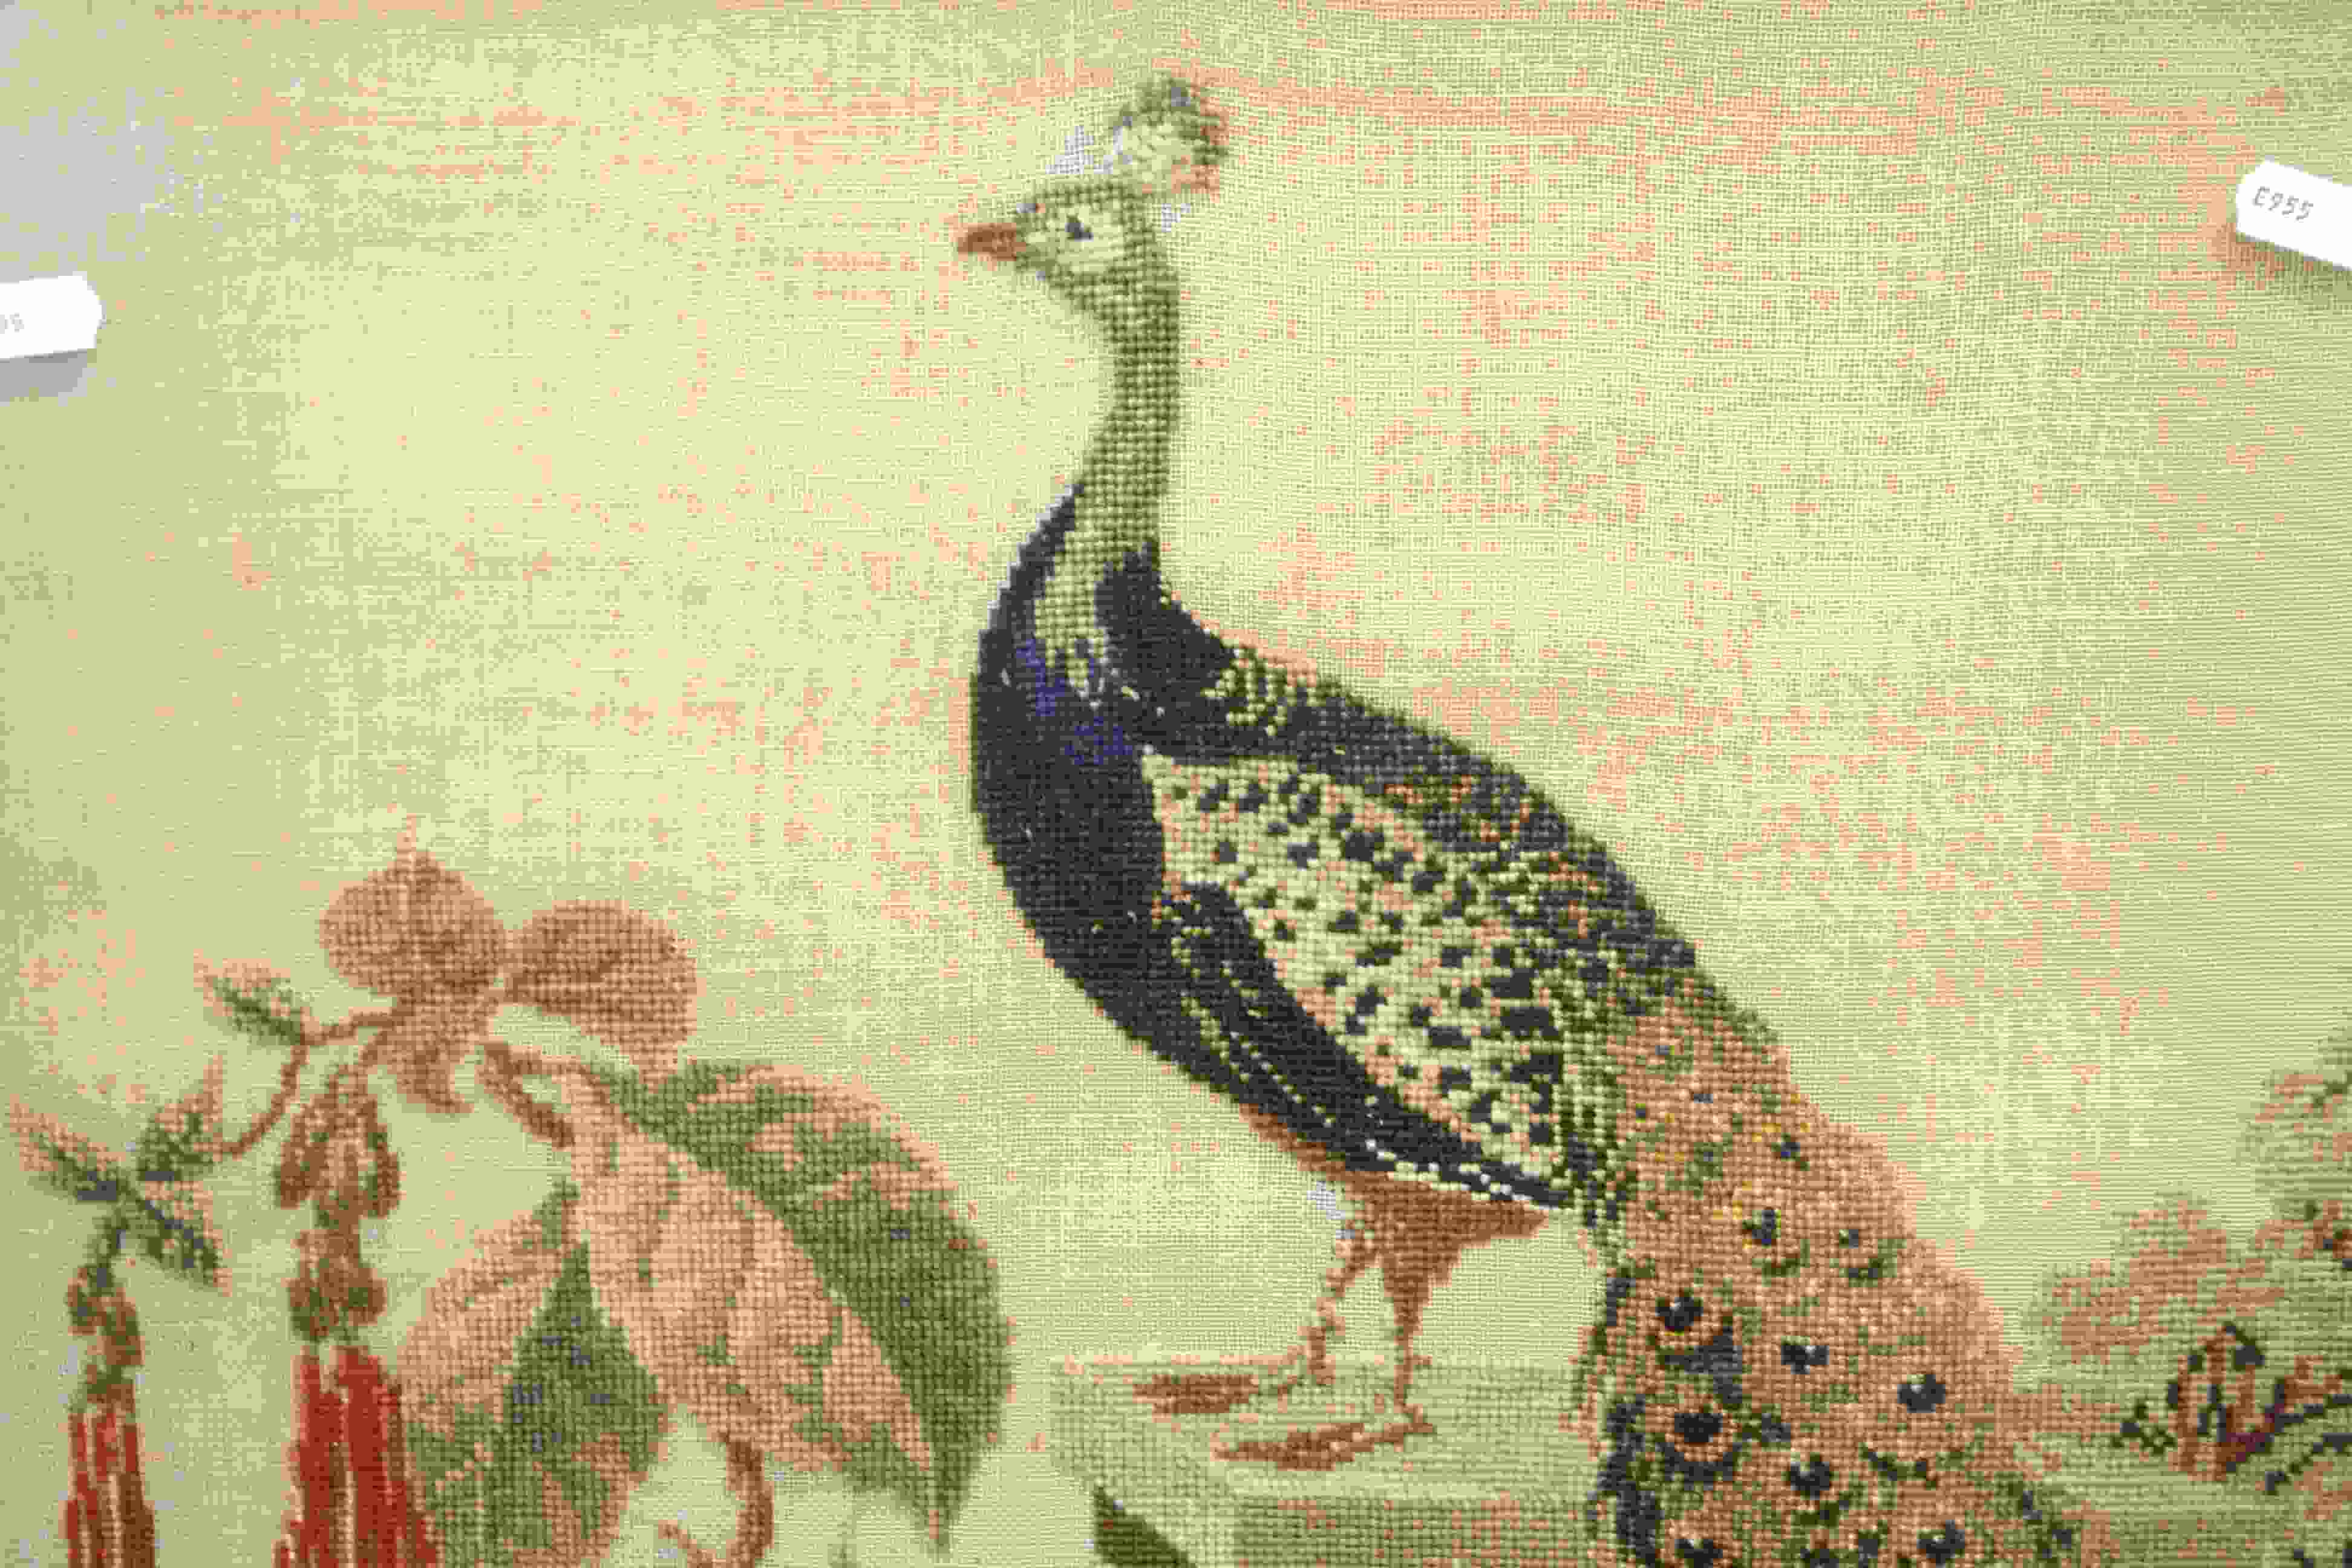 Framed and glazed tapestry of a peacock within floral scene approx. 77cm x 68cm - Image 4 of 5